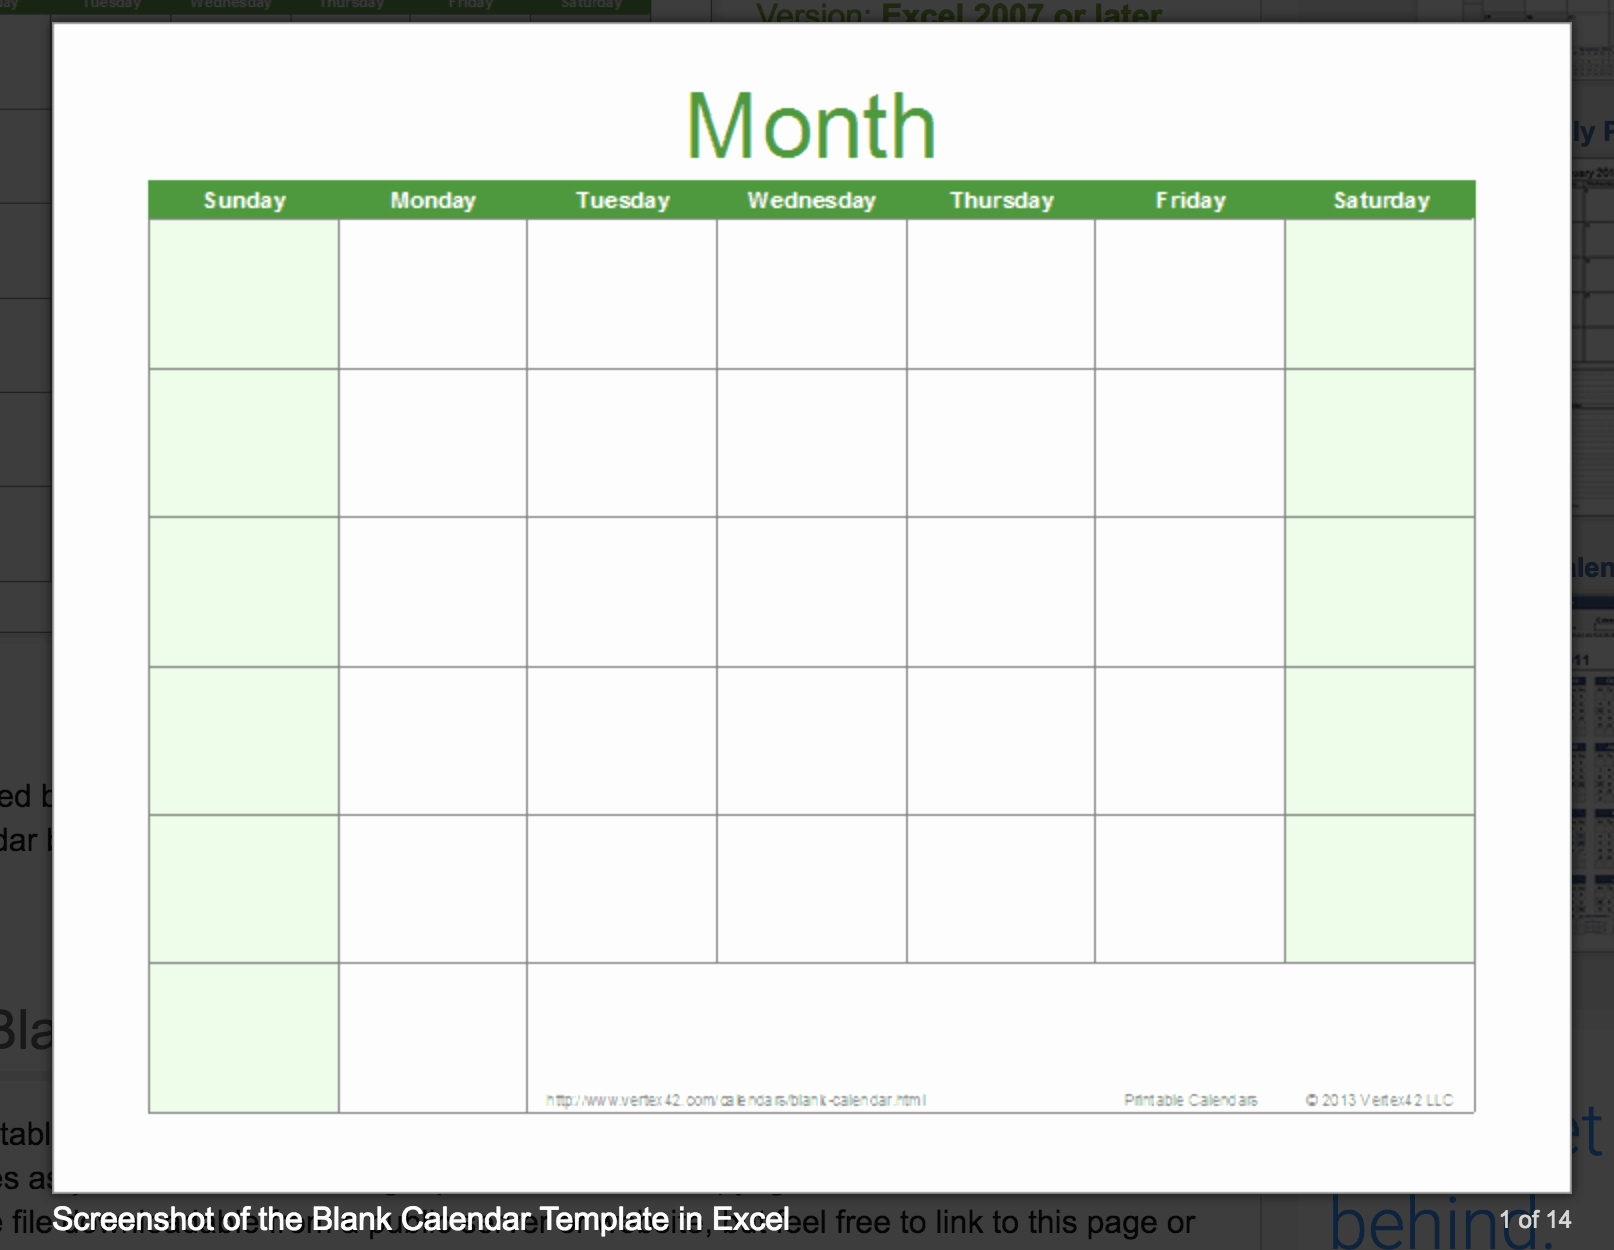 Lovely 46 Sample Excel Calendar Templates Free 2019 | Tumblr-Blank Excel Calender That Starts On Monday